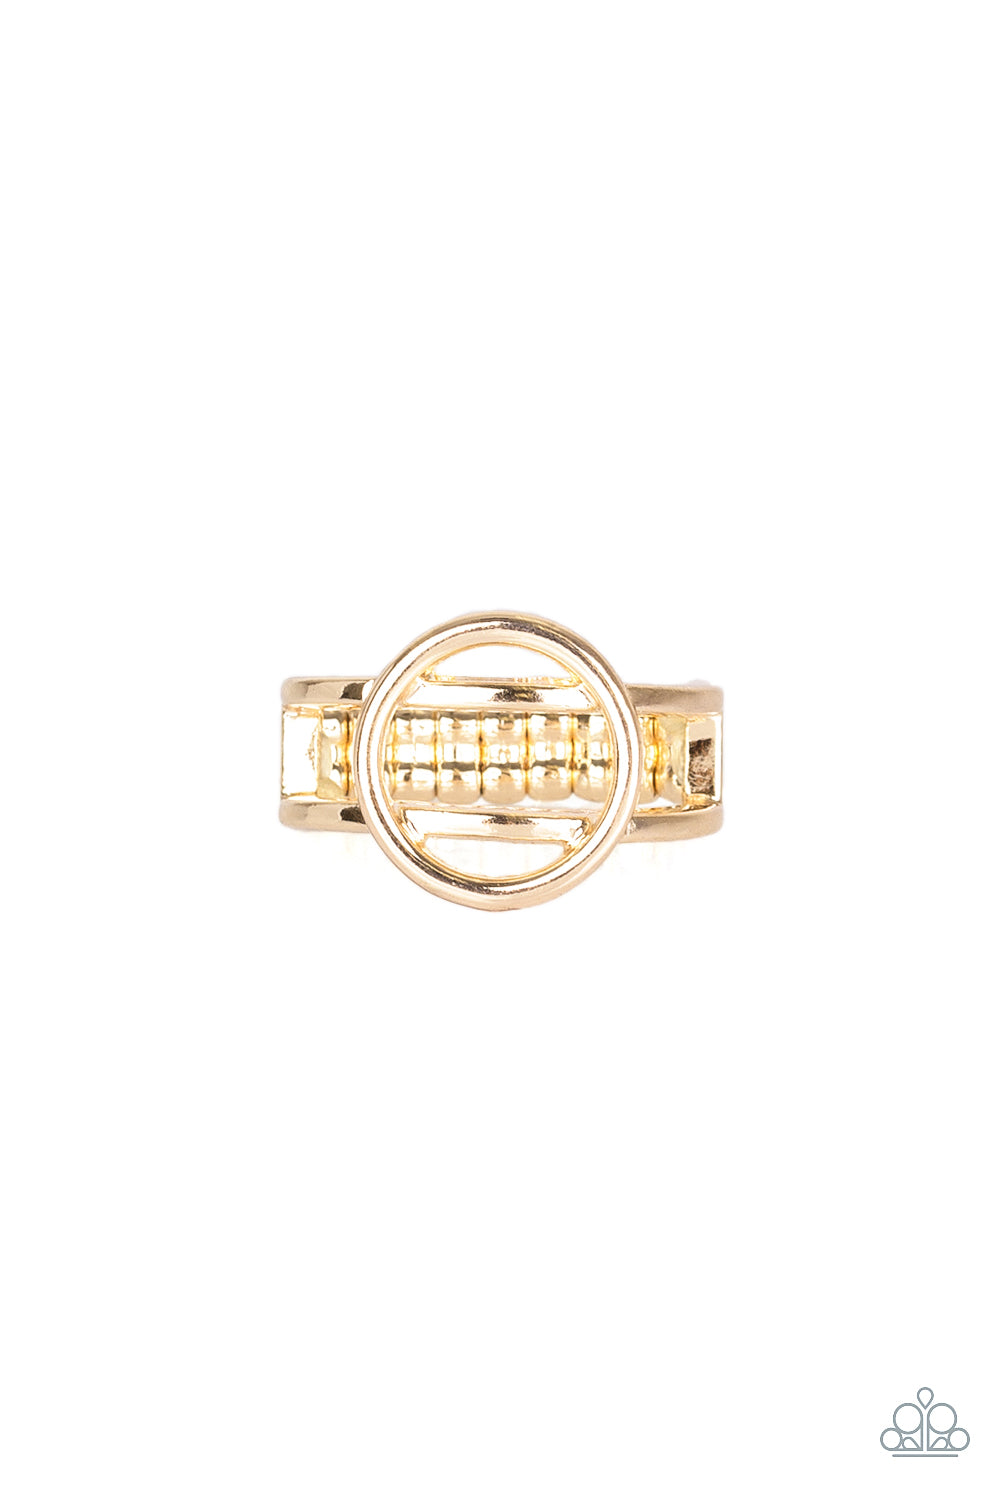 City Center Chic - Rose Gold Ring